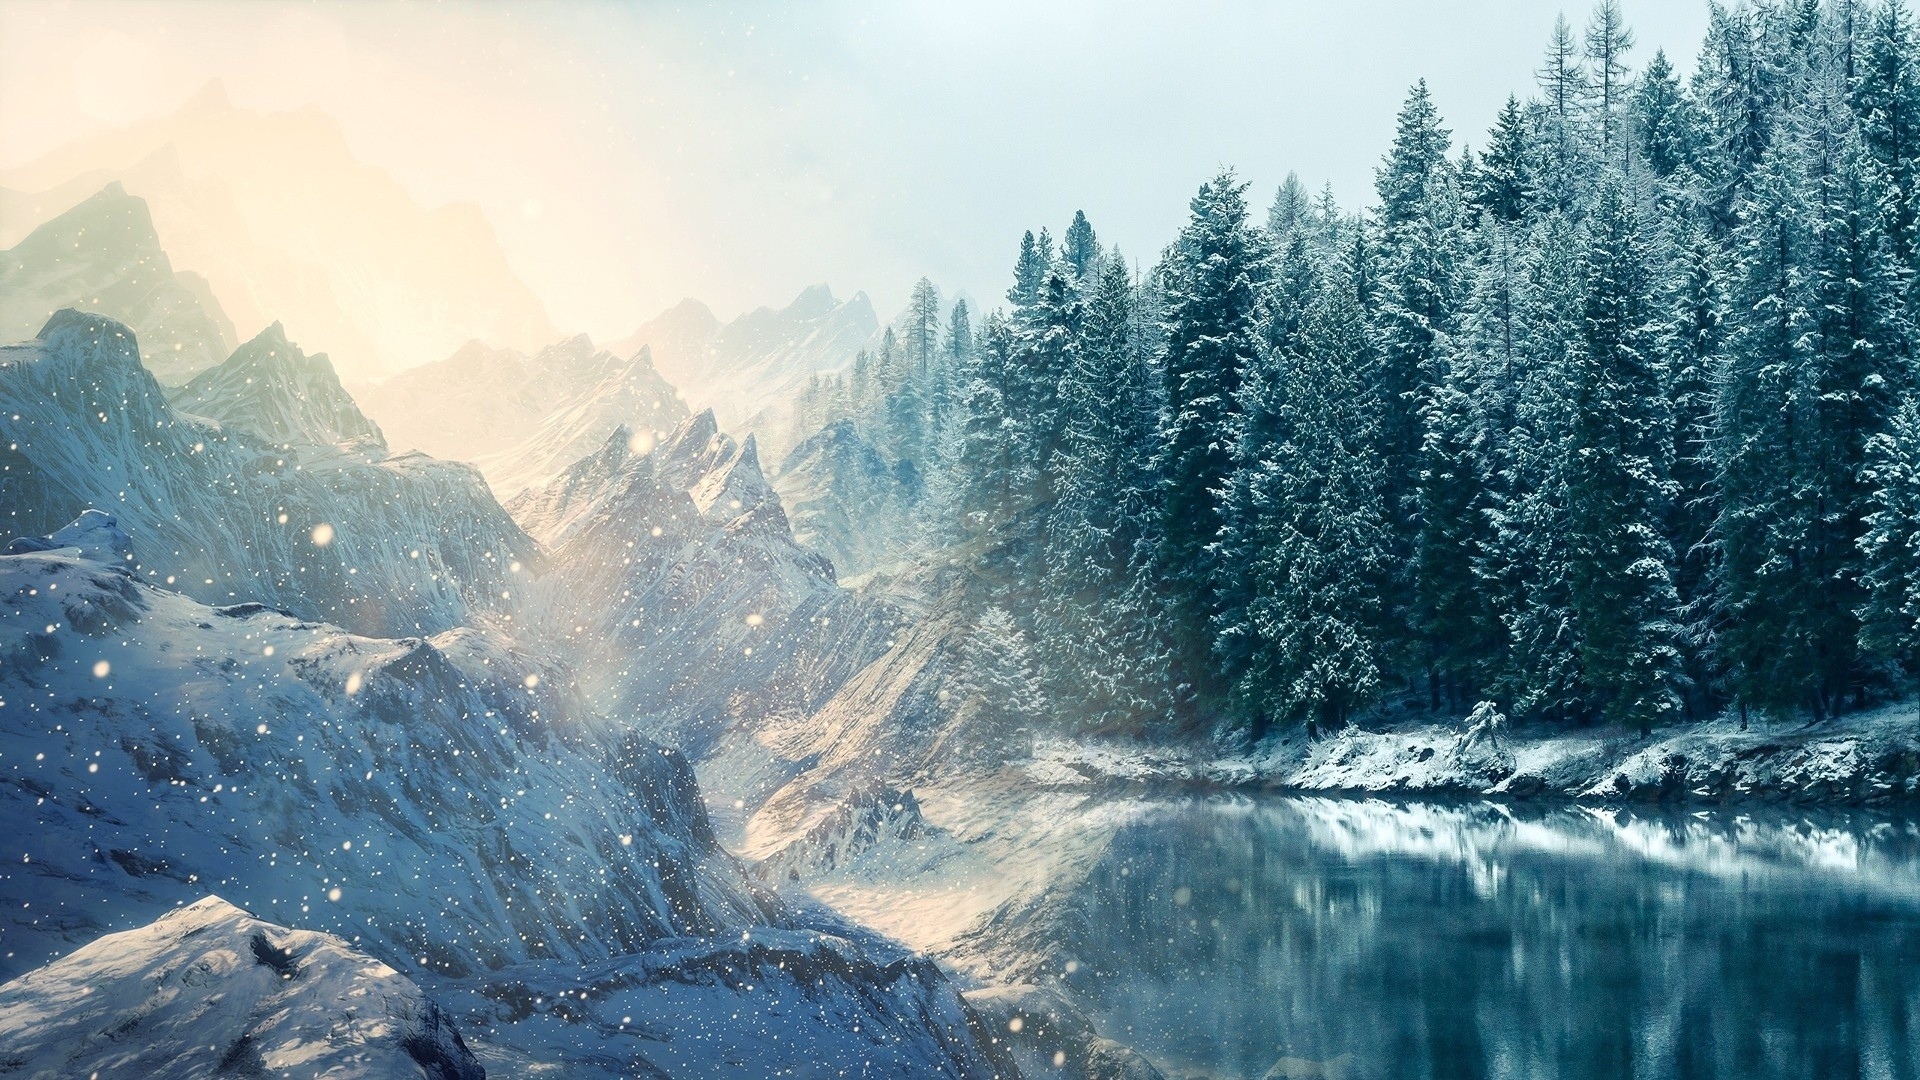 Manipulation cg digital art artistic rivers lakes water reflection cold shore trees forest winter snow seasons snowing wind flakes drops sparkle wallpaperx1080